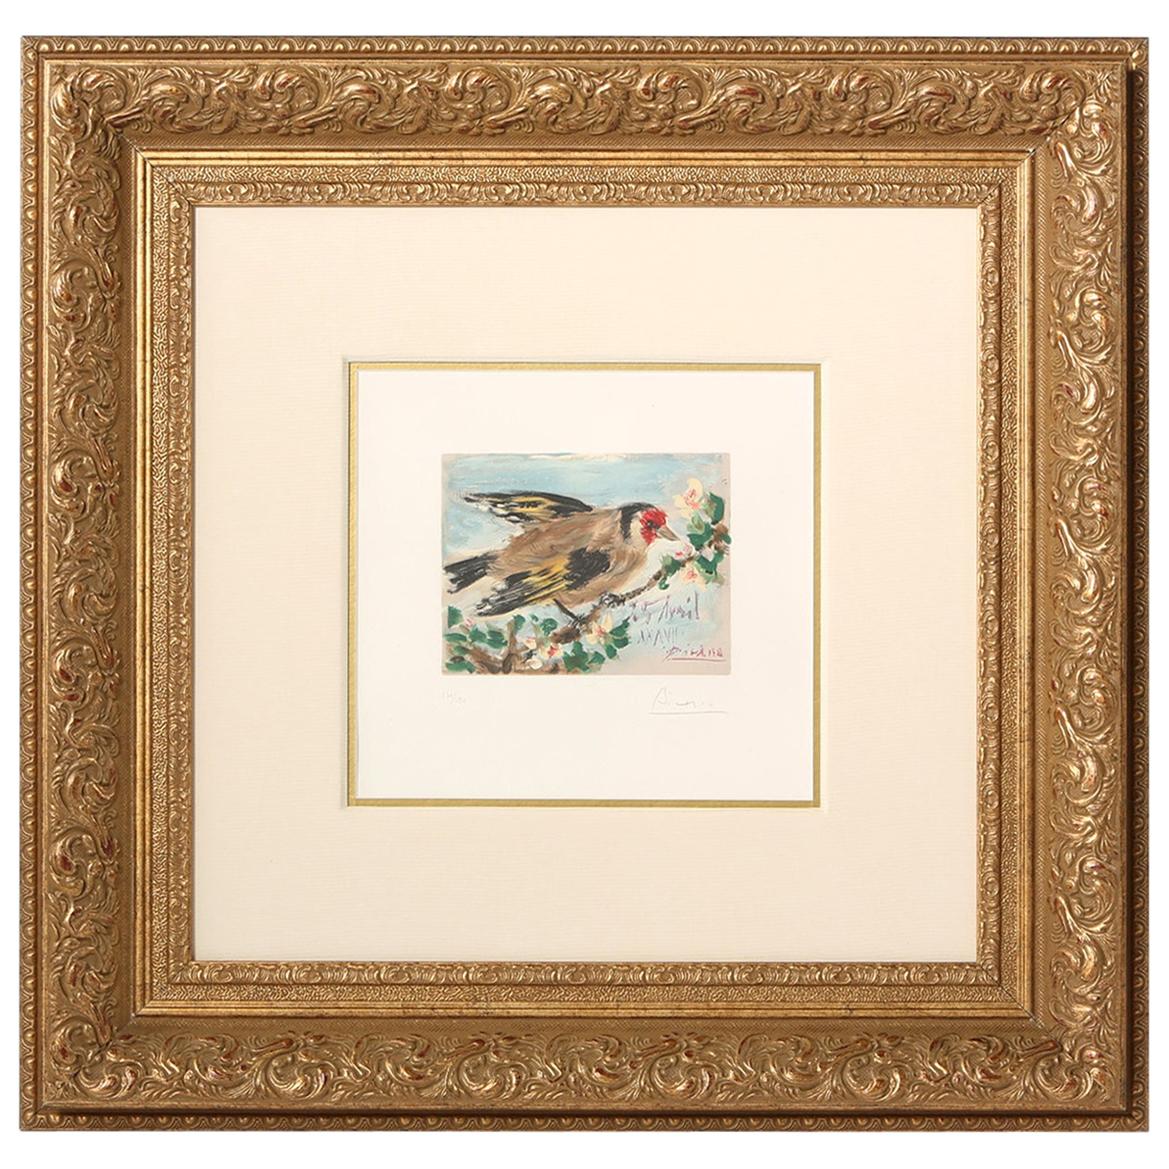 Giltwood Framed "Le Oiseau" Picasso Lithograph For Sale